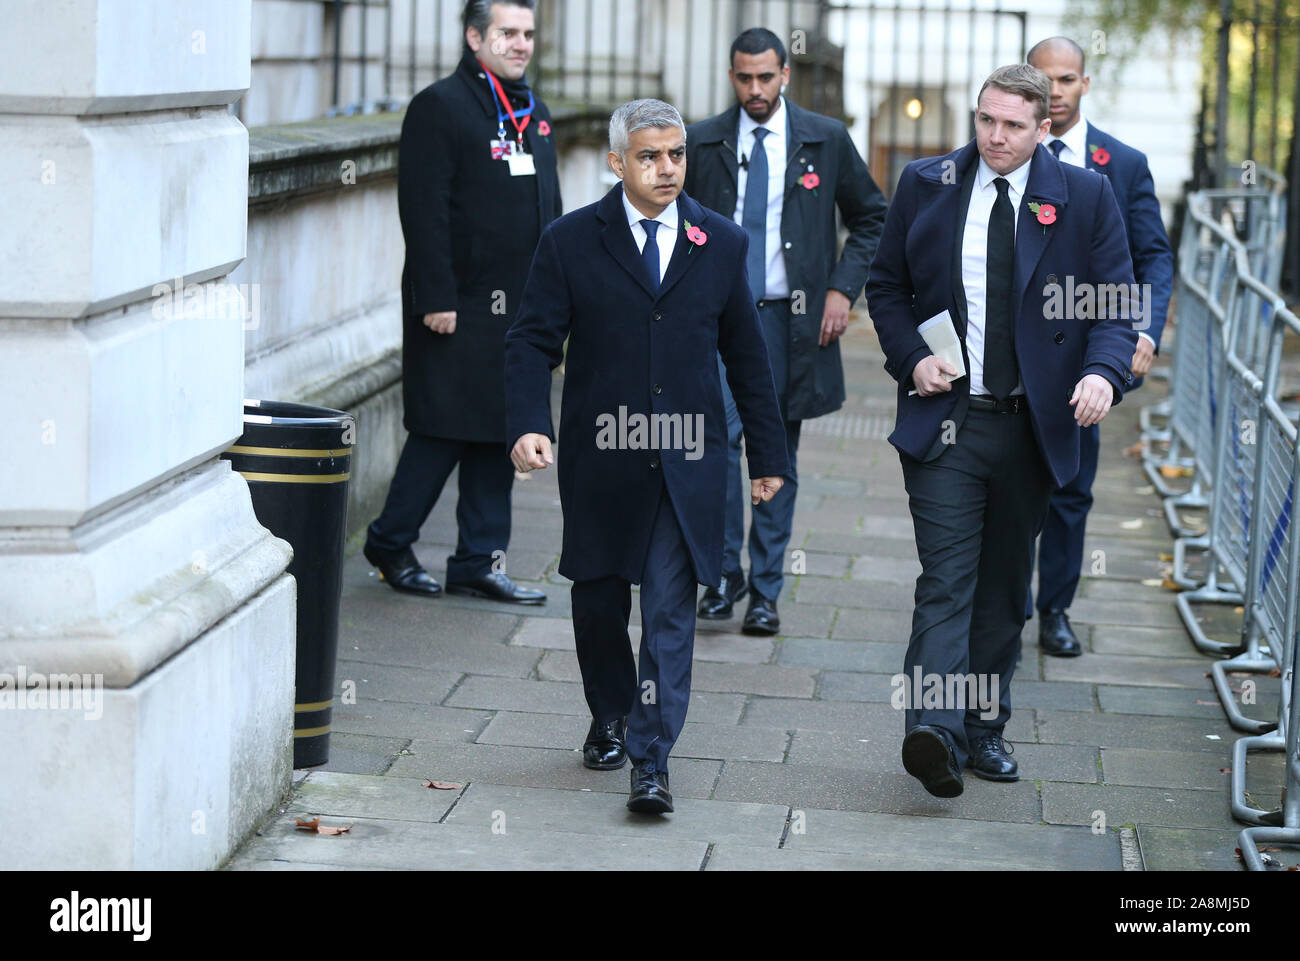 Mayor of London Sadiq Khan in Downing Street arriving for the Remembrance Sunday service at the Cenotaph memorial in Whitehall, central London. PA Photo. Picture date: Sunday November 10, 2019. See PA story ROYAL Remembrance. Photo credit should read: Jonathan Brady/PA Wire Stock Photo